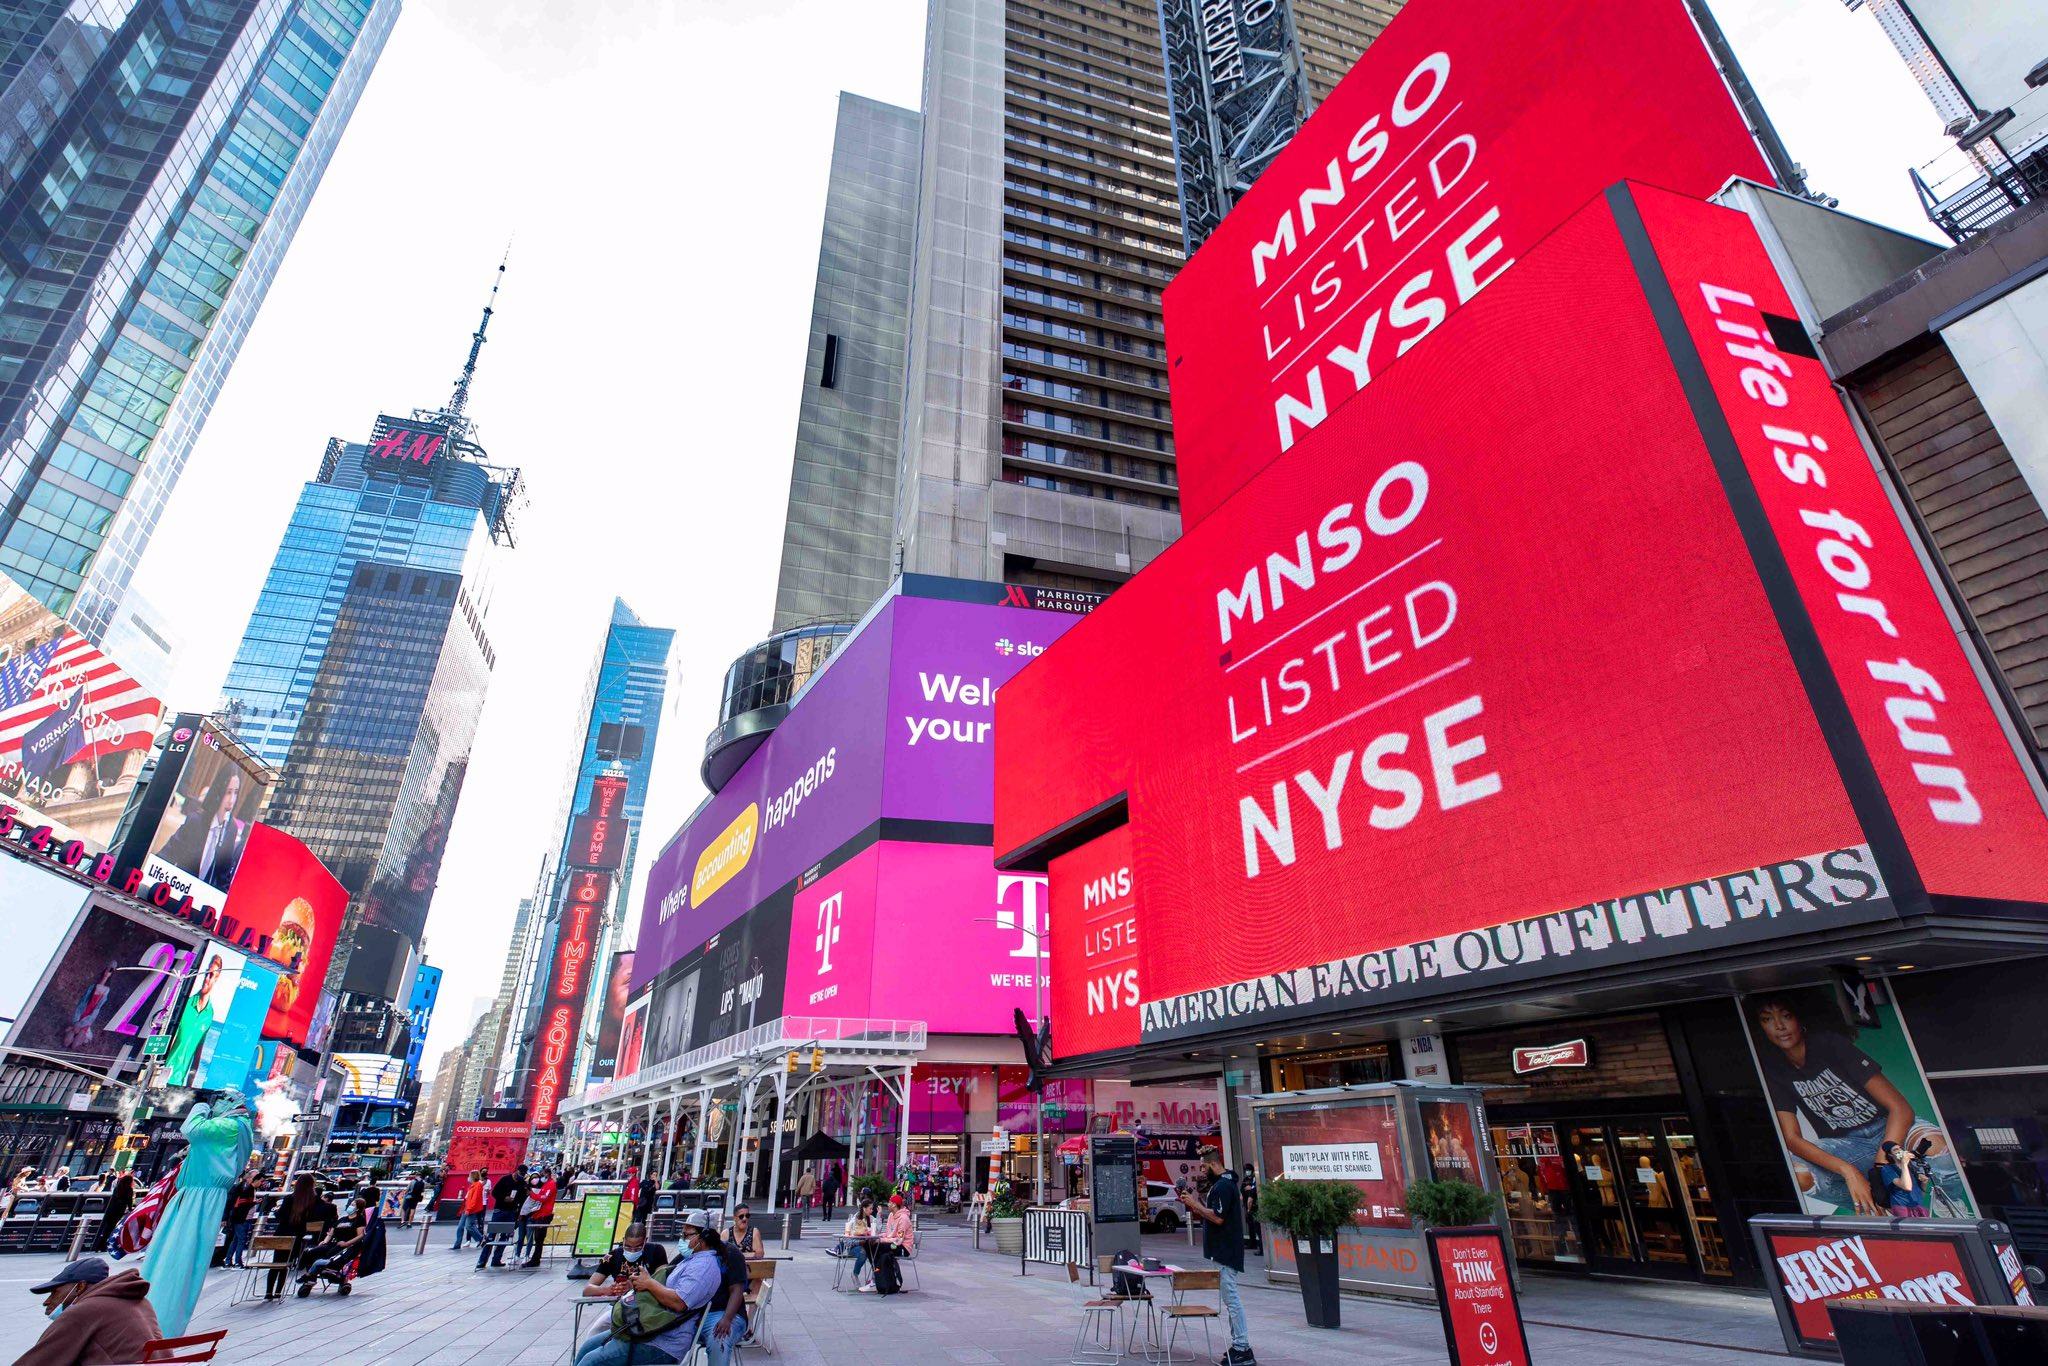 Miniso celebrates its US IPO with a takeover of Manhattan’s Times Square. Photo: Twitter@NYSE